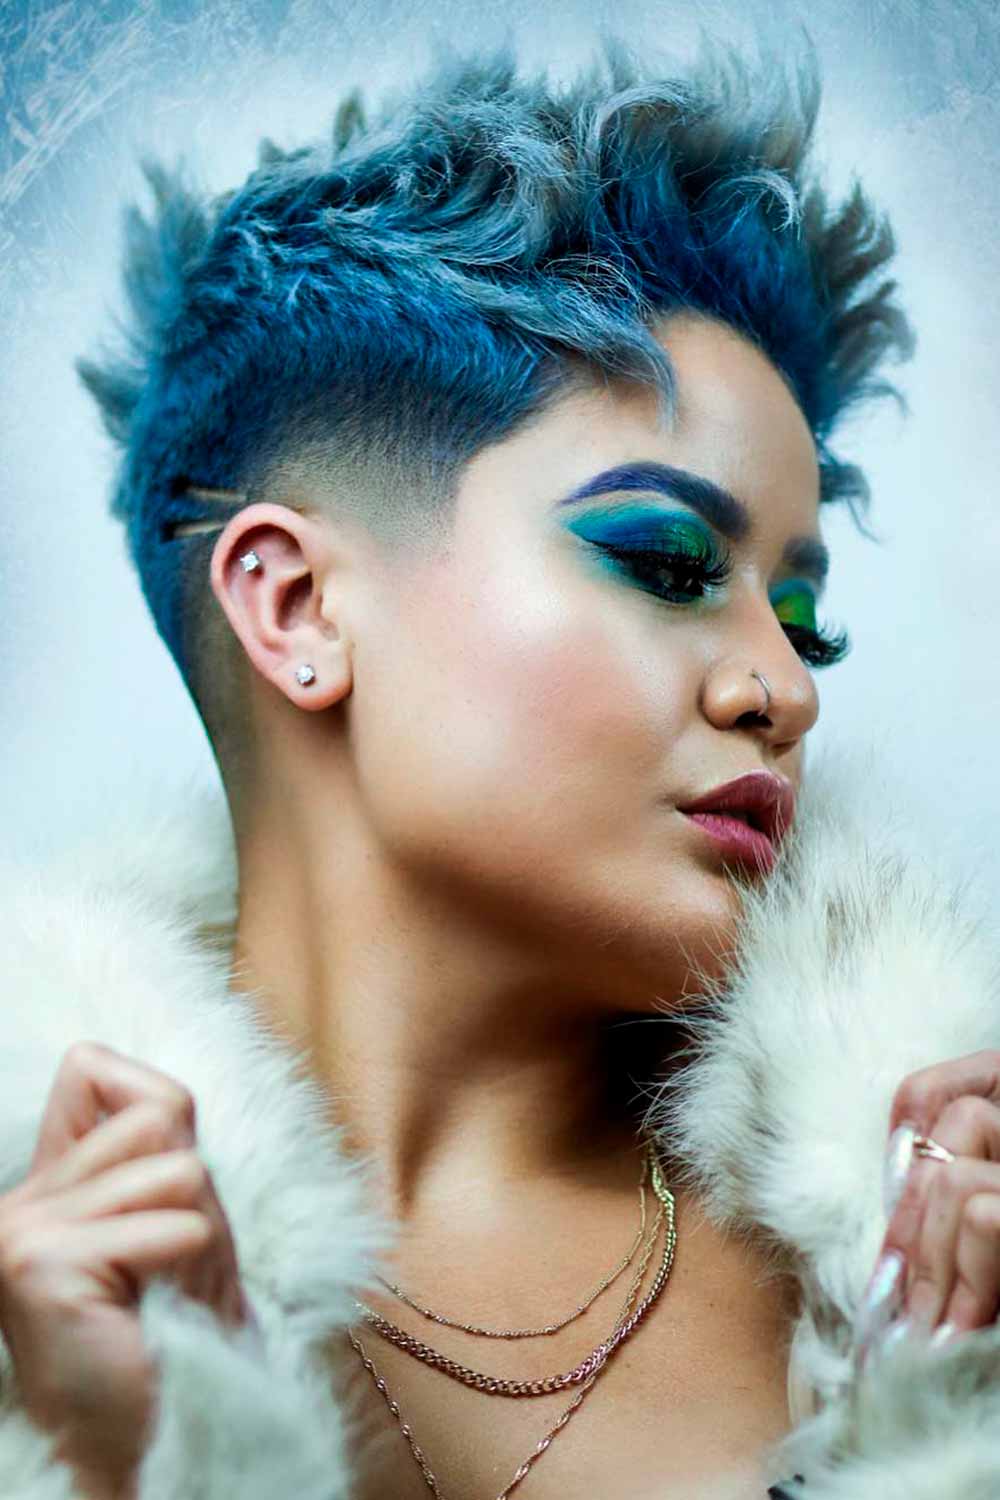 Low Tapered Skin Fade Hair #androgynoushaircuts #androgynoushairstyles